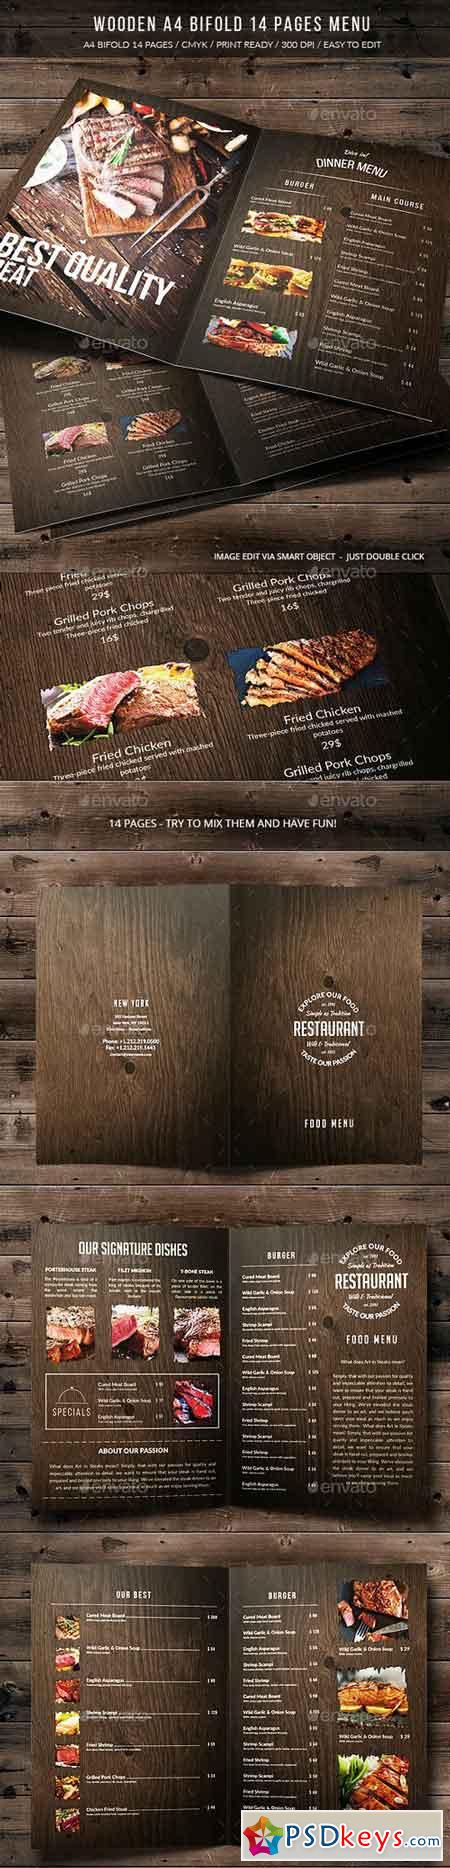 Wooden A4 Bifold 14 Pages Menu 17415665